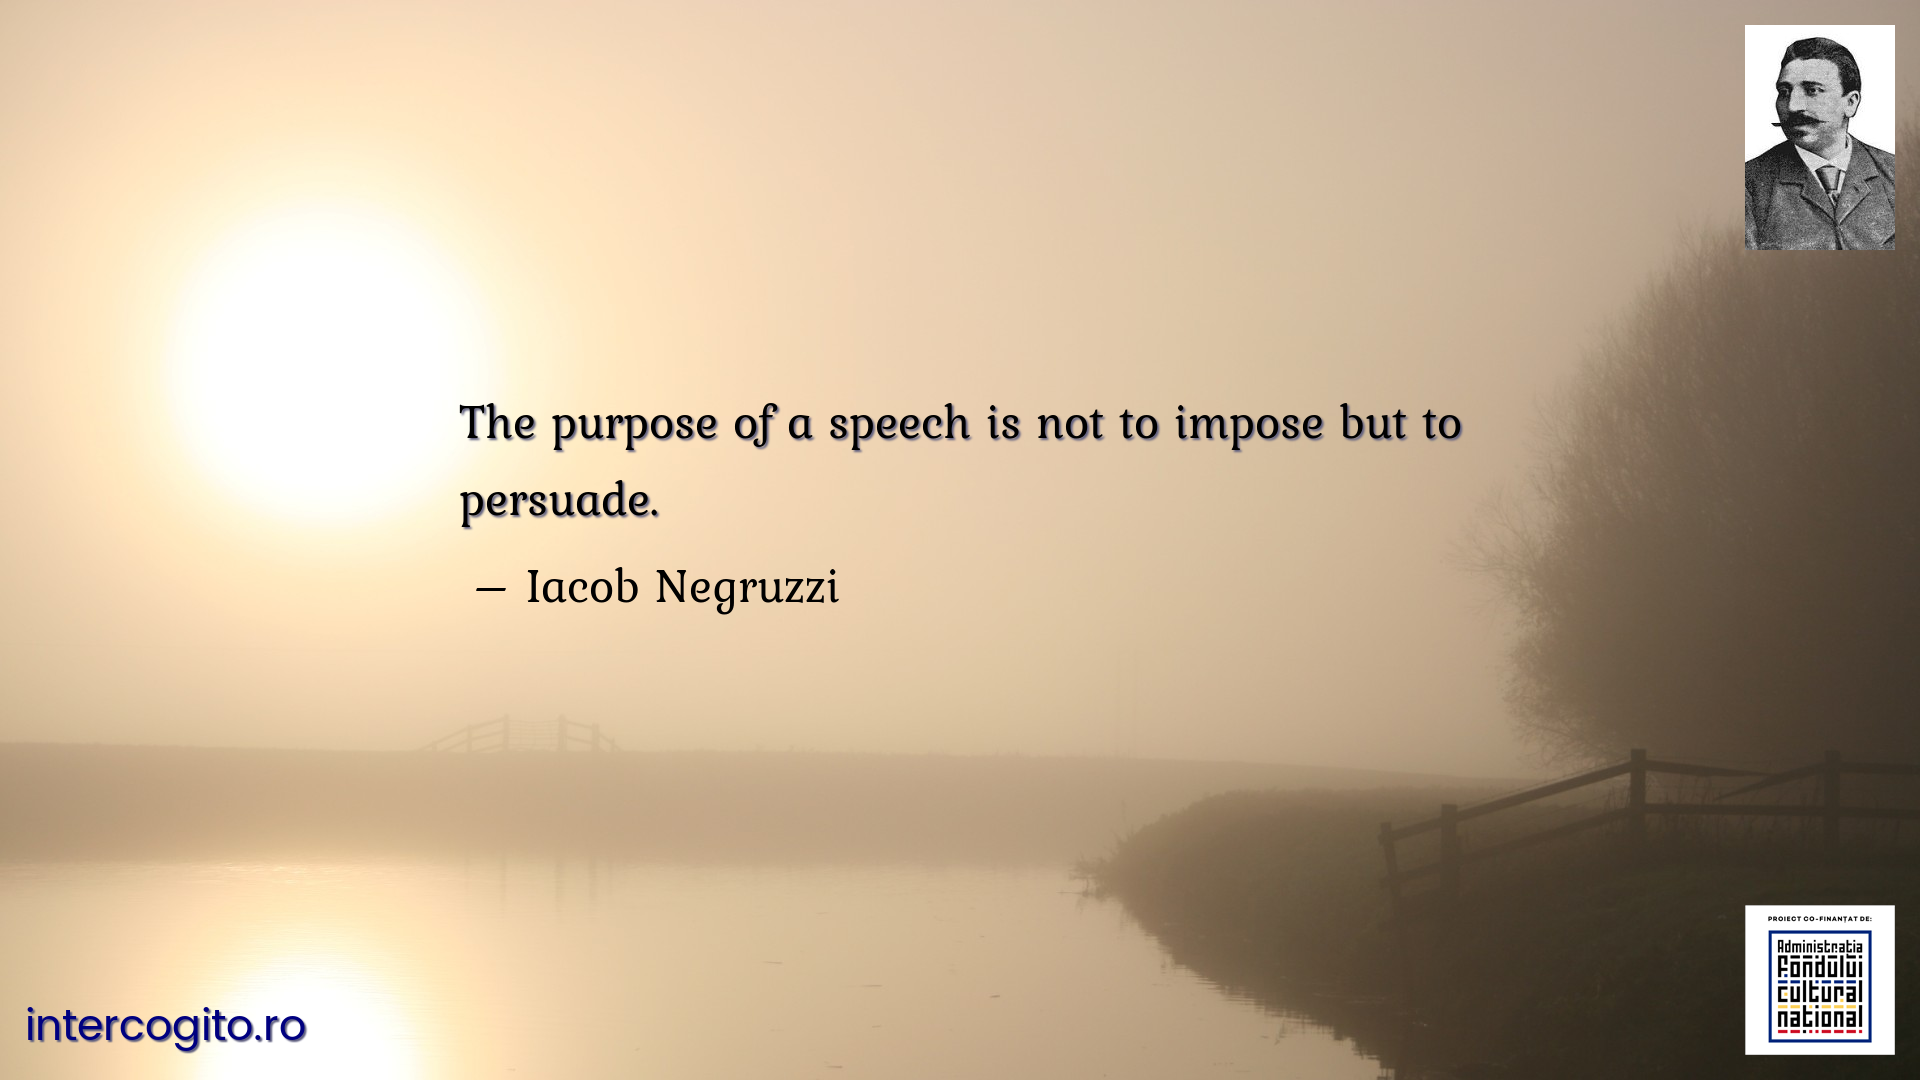 The purpose of a speech is not to impose but to persuade.